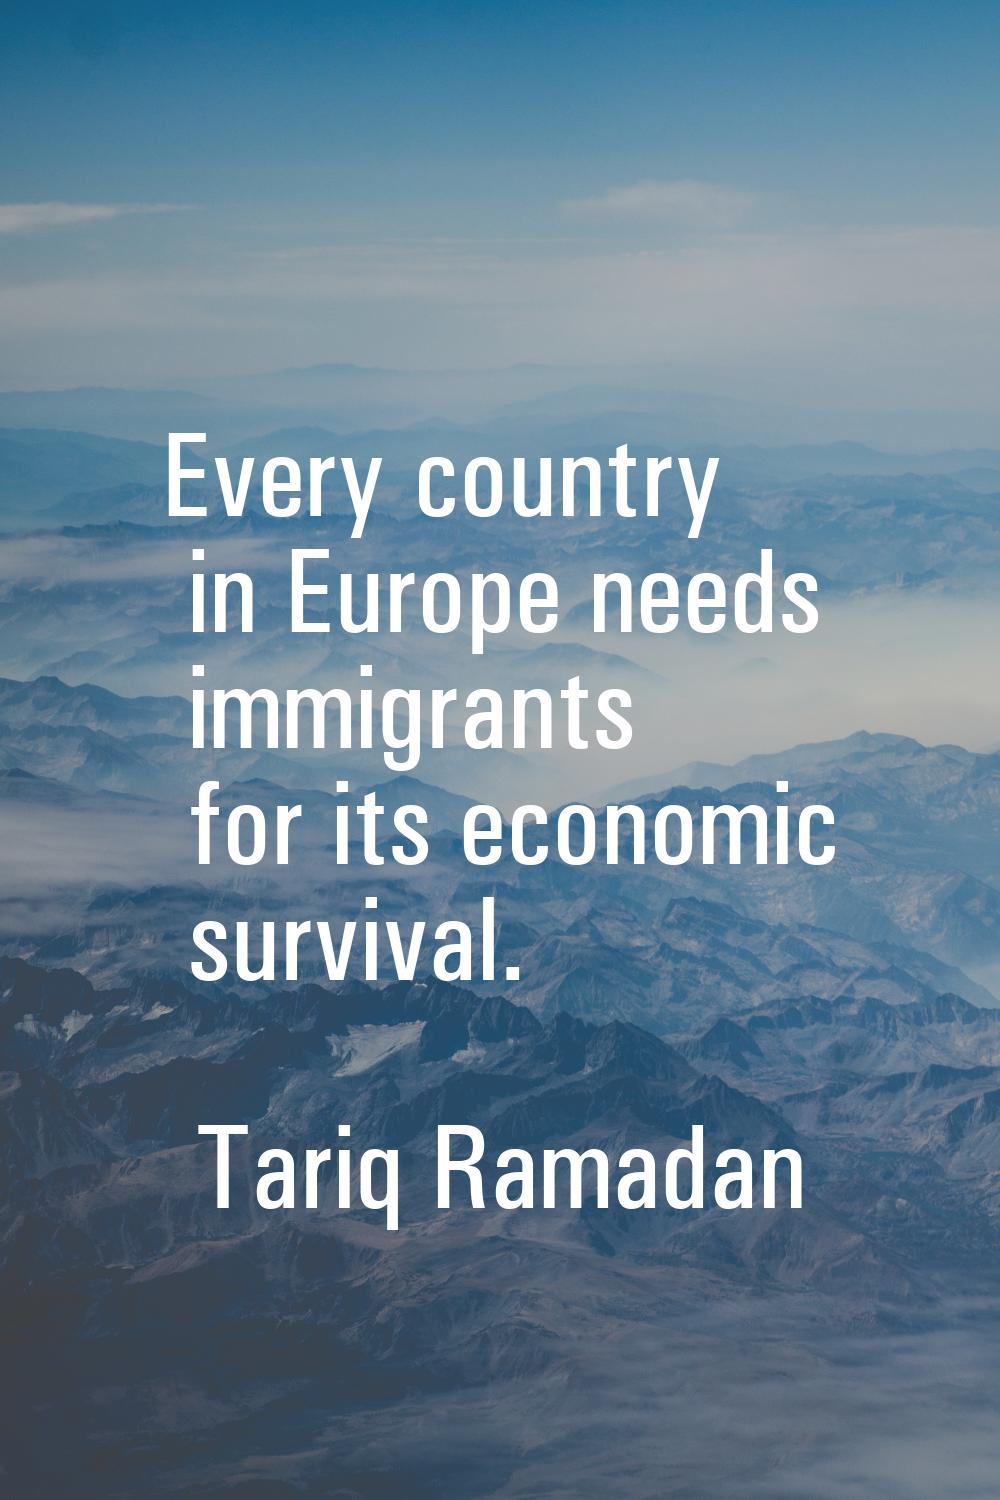 Every country in Europe needs immigrants for its economic survival.